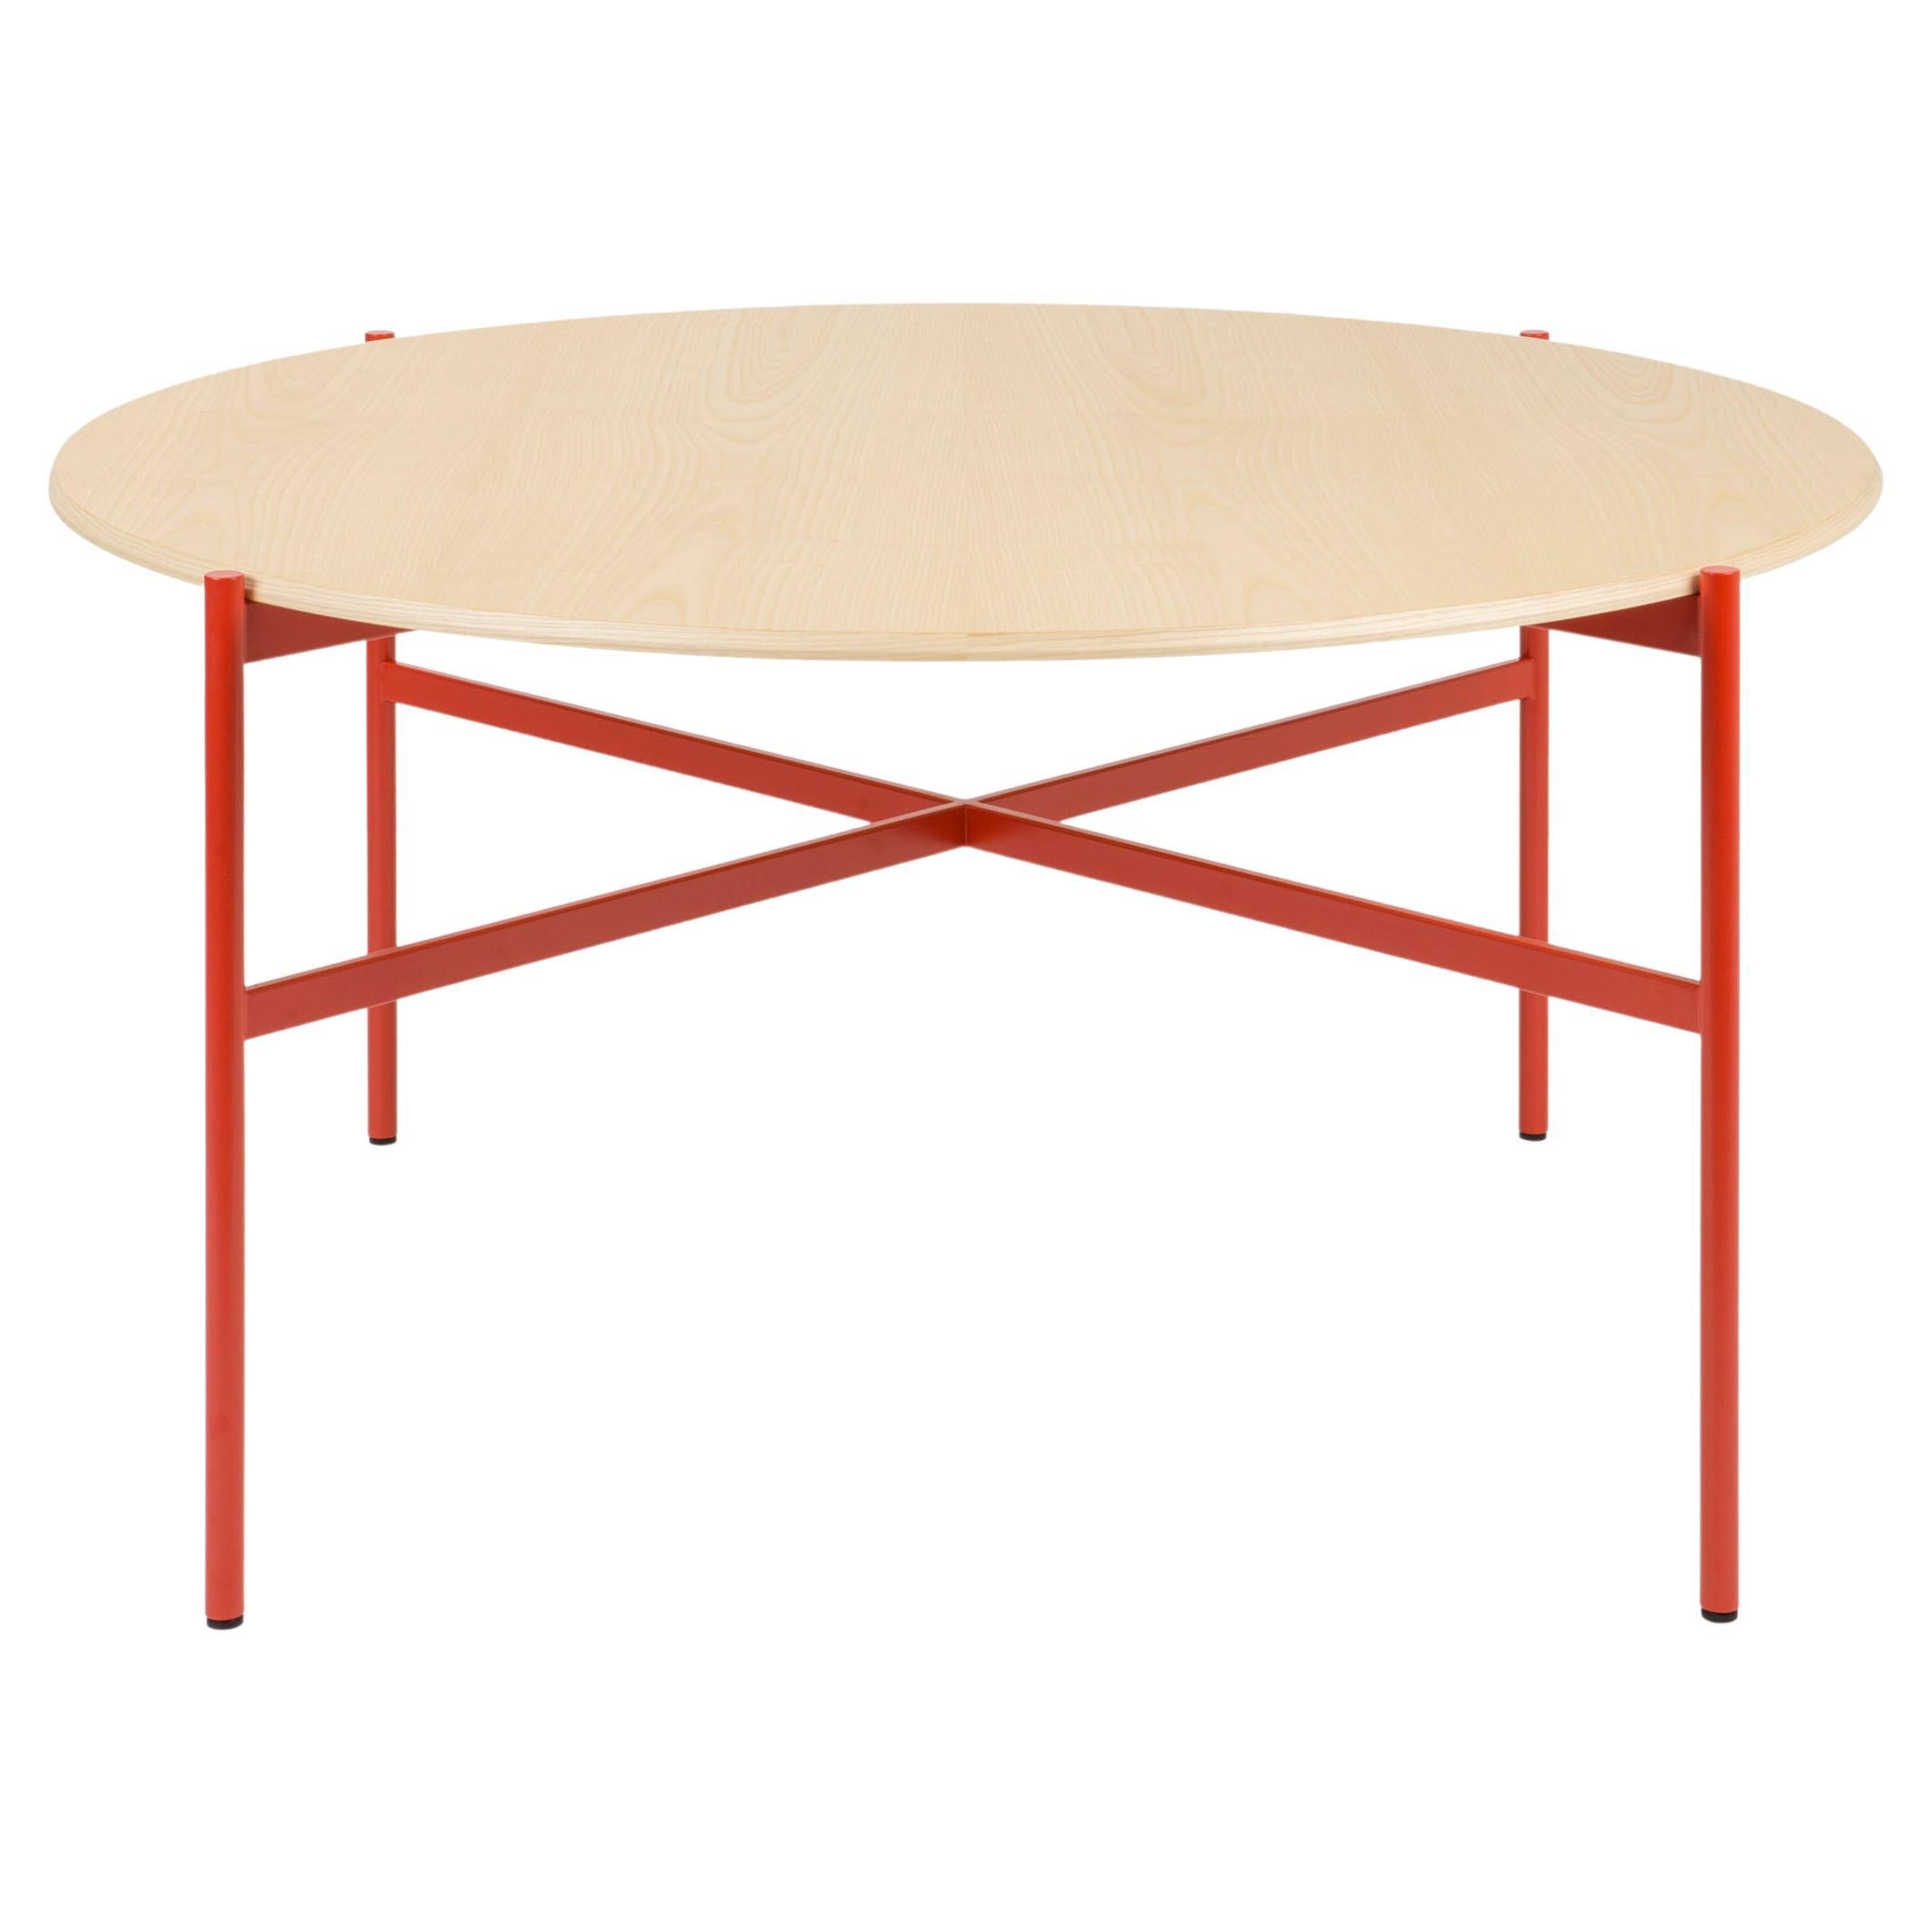 21st Century Modern Table Red MDF Top with Solid Wood Edge Blade Made in Italy For Sale